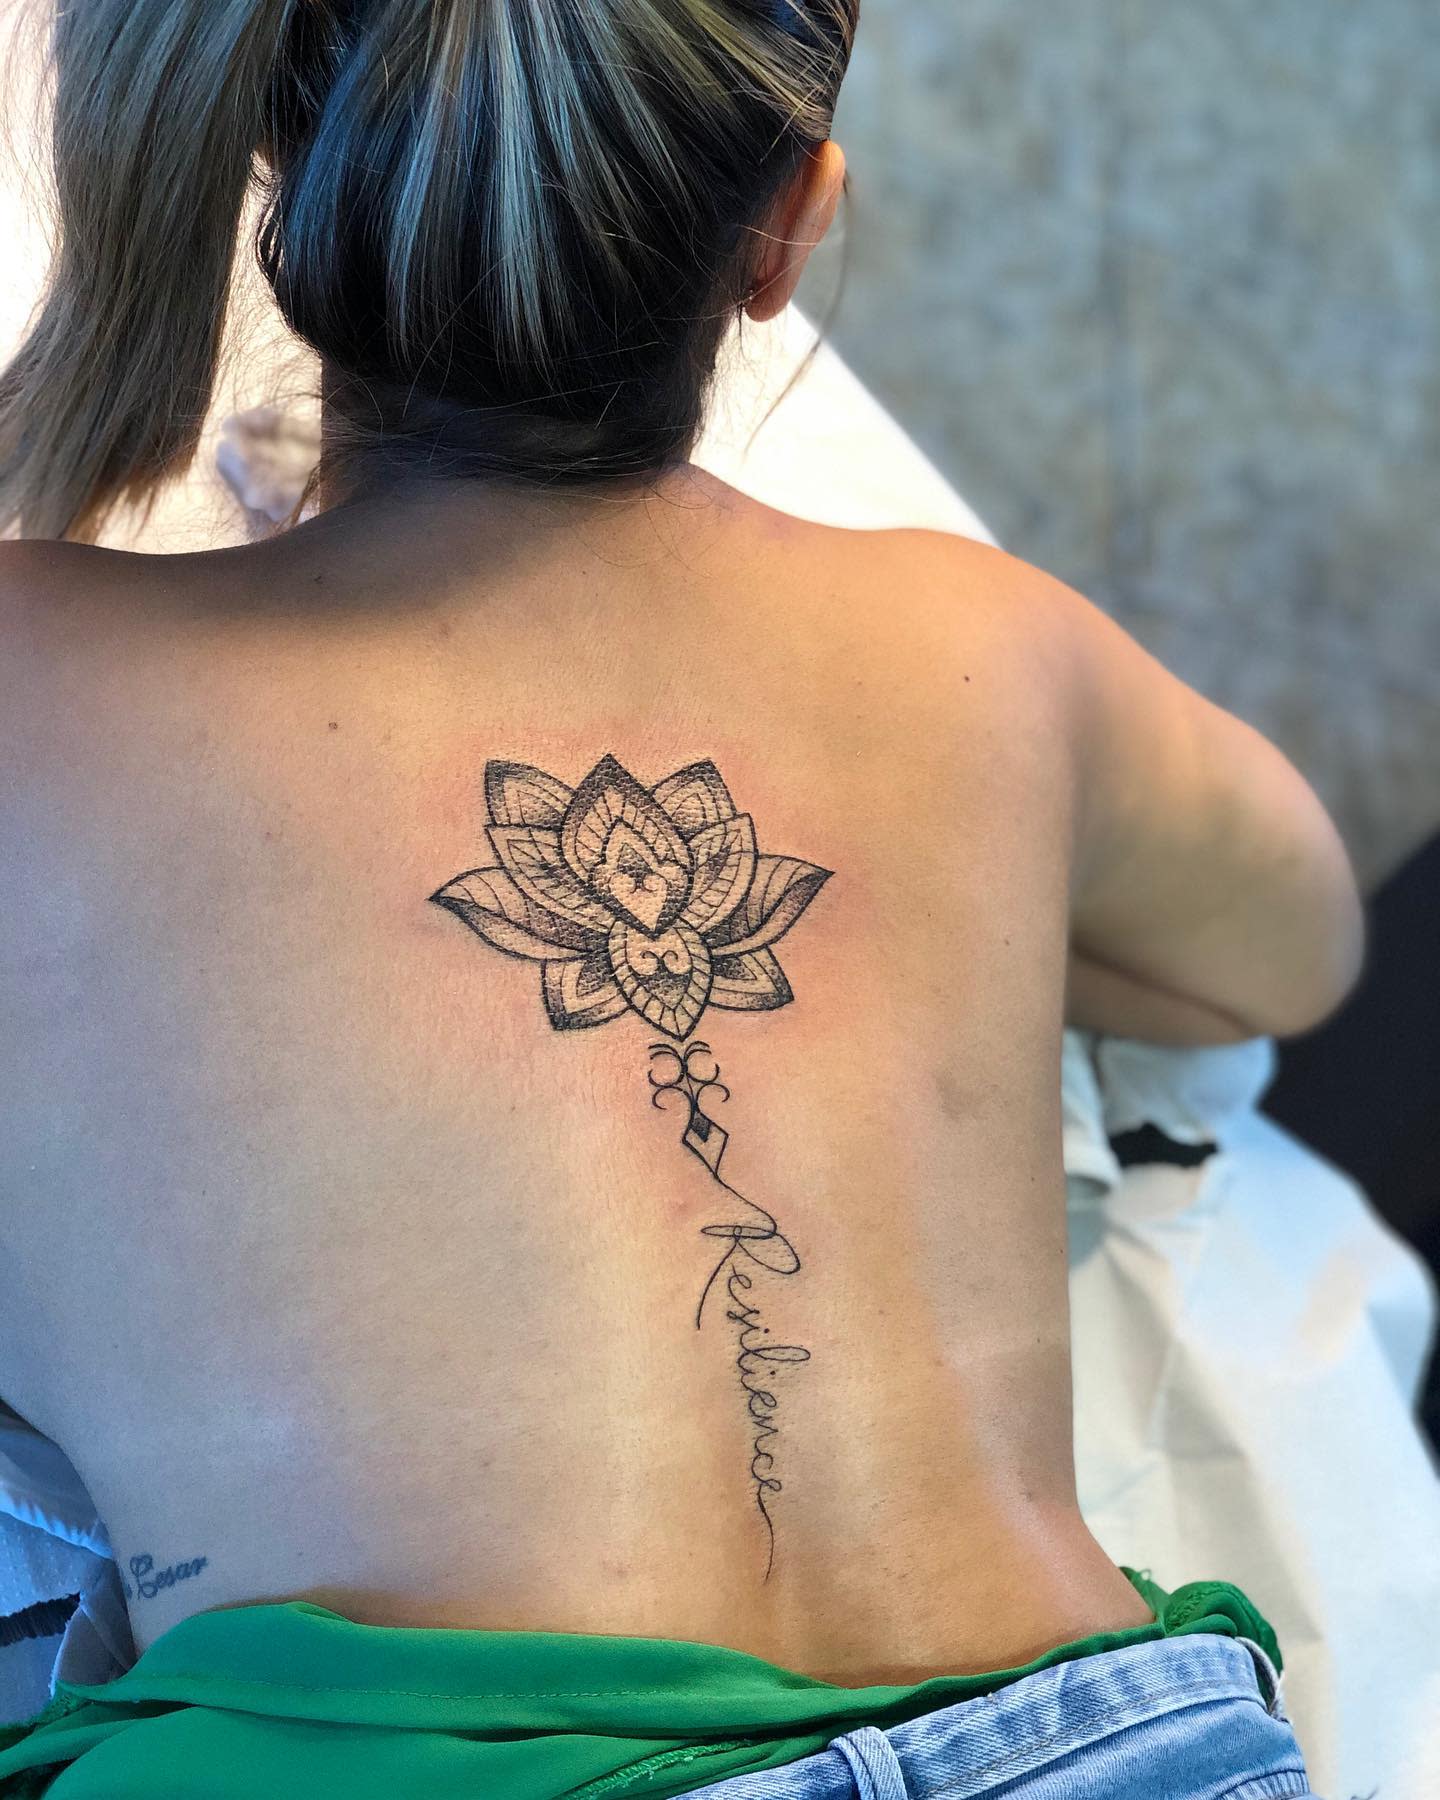 Back Resilience Tattoo -don_galante1